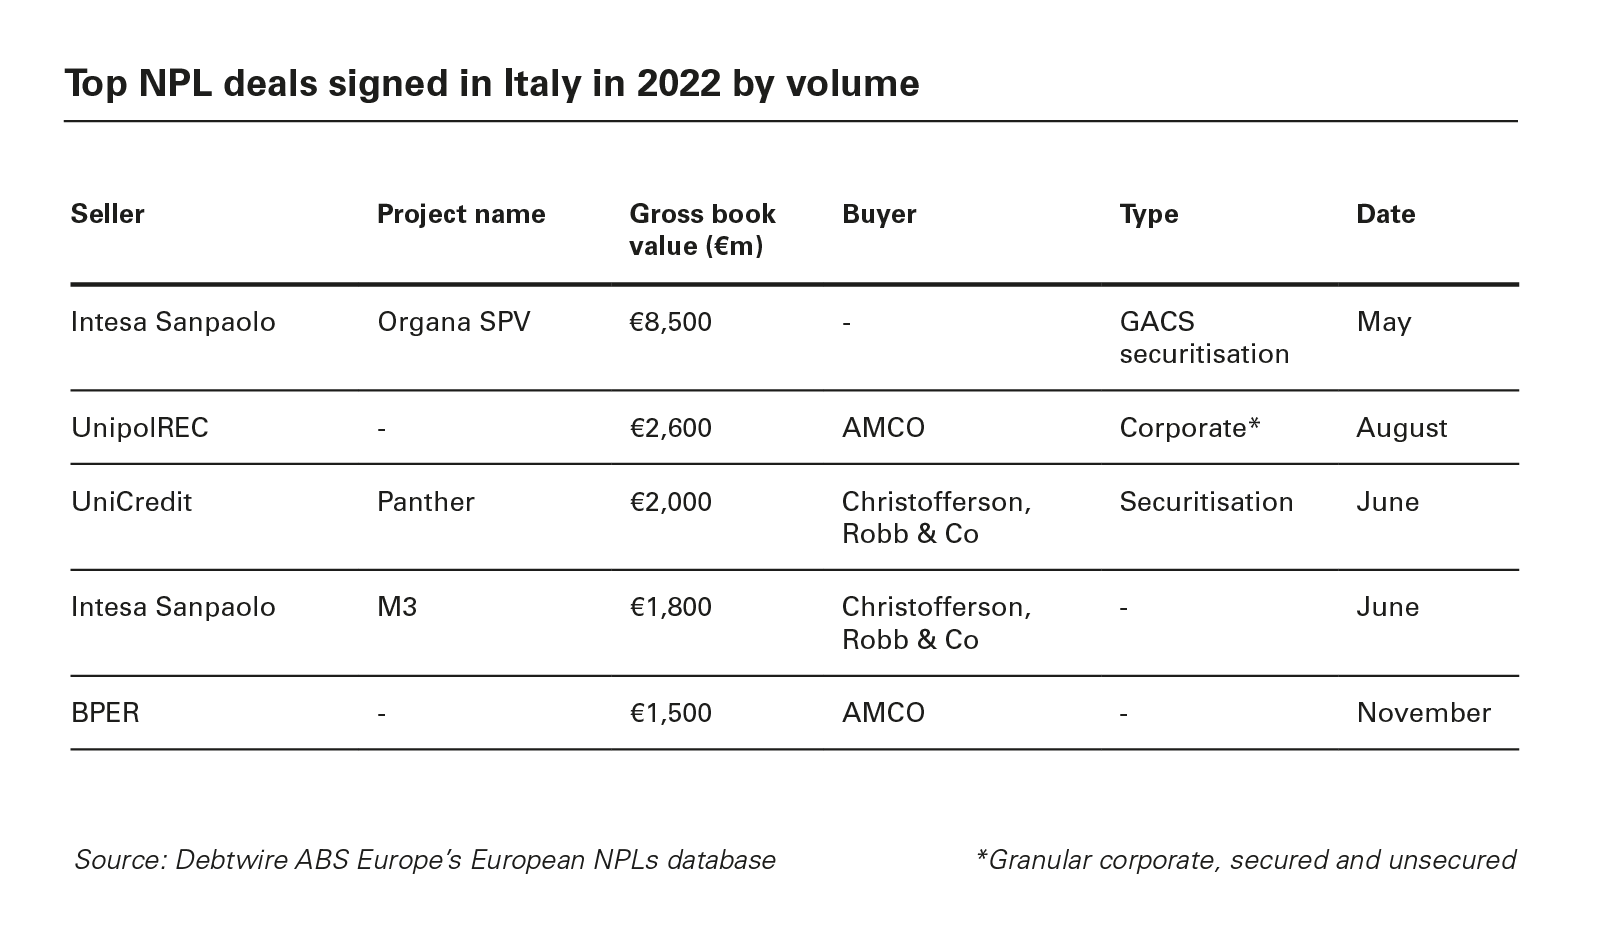 Top NPL deals signed in Italy in 2022 by volume